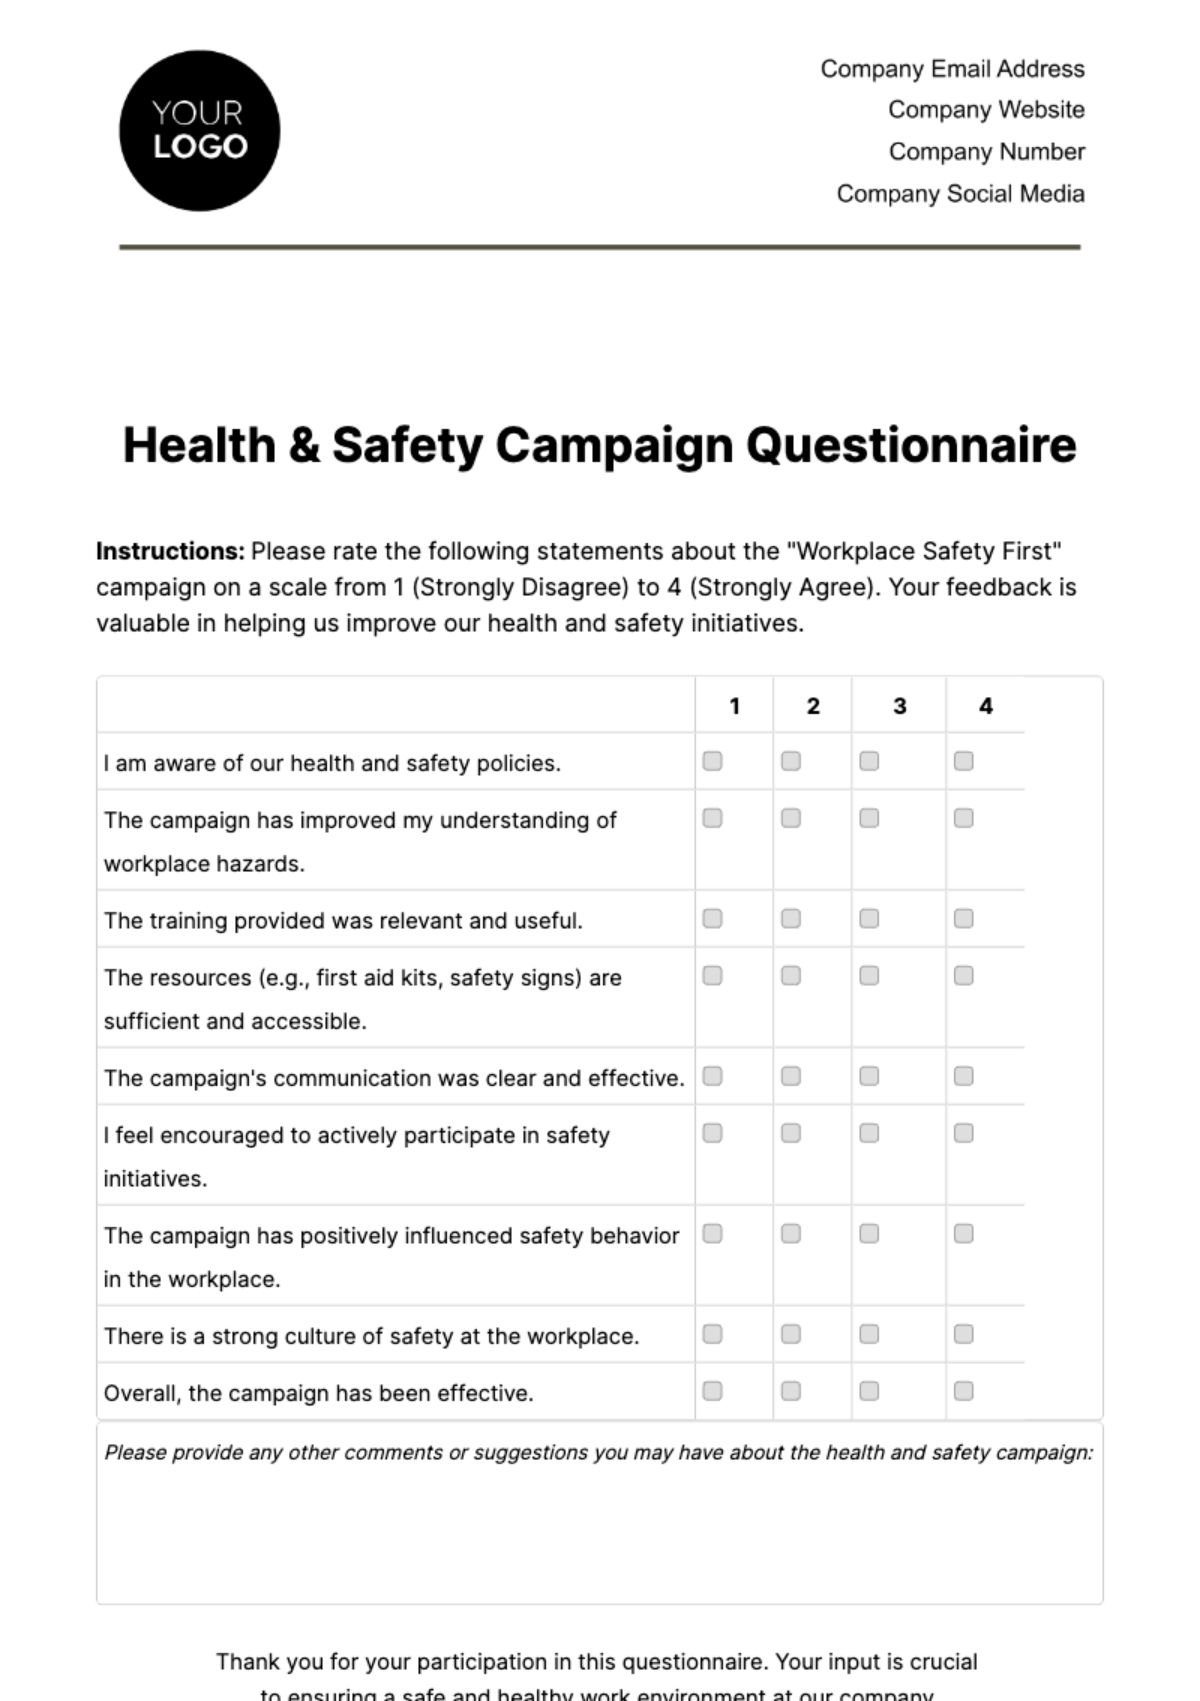 Free Health & Safety Campaign Questionnaire Template